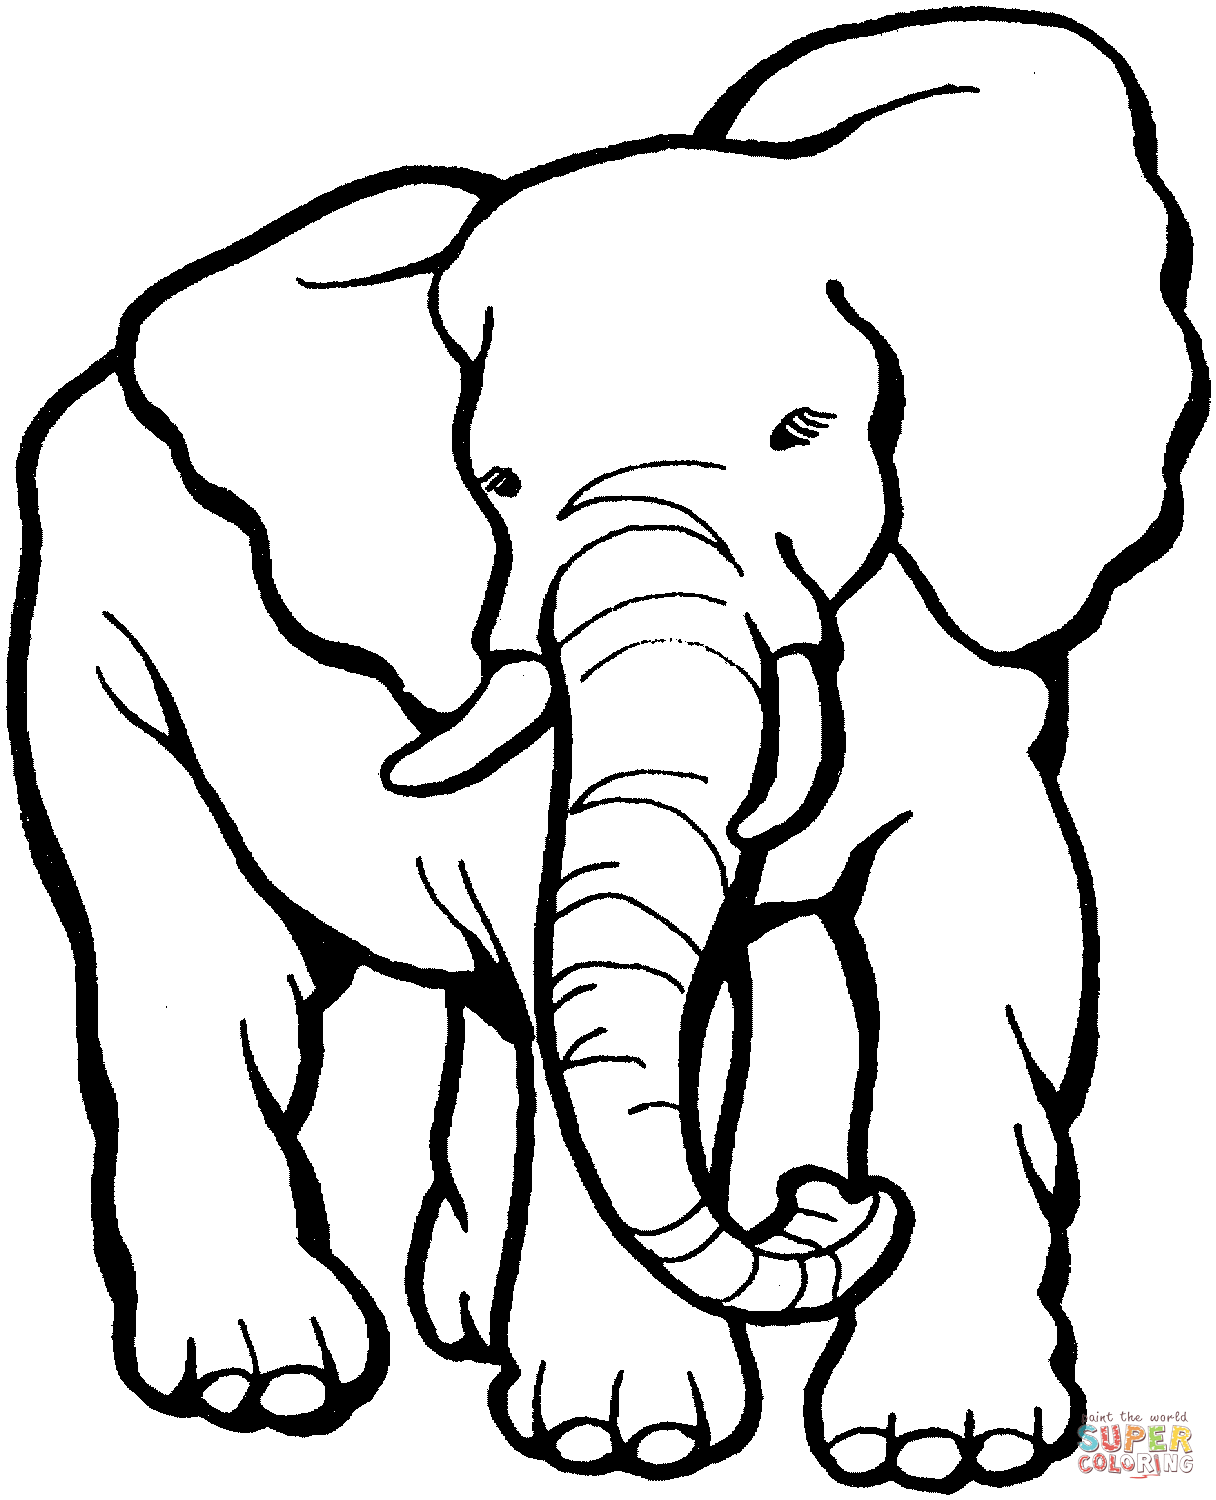 Elephant coloring page free printable coloring pages